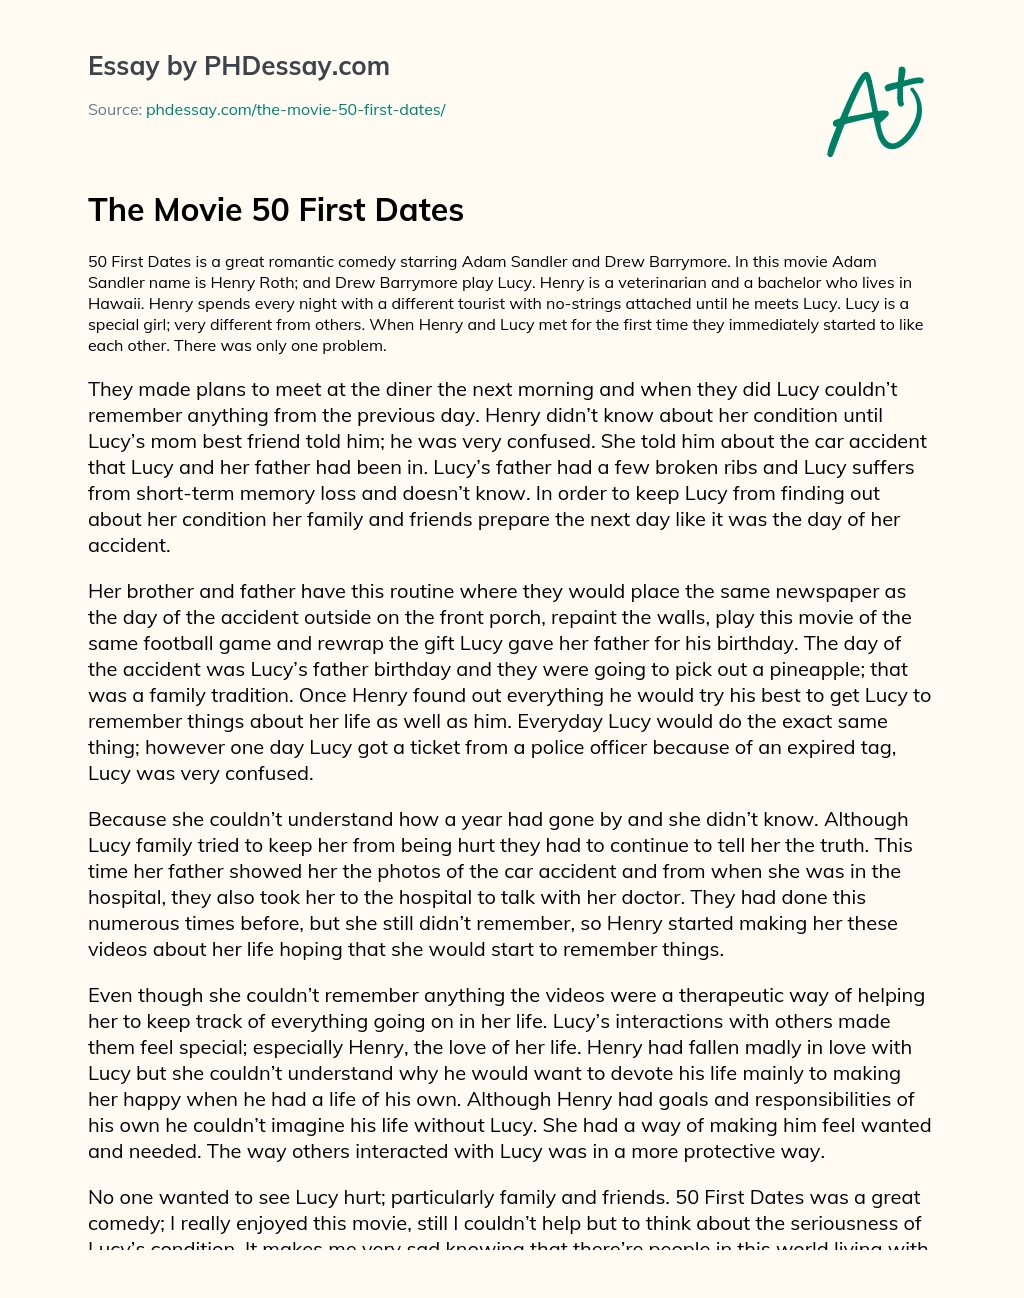 The Movie 50 First Dates essay